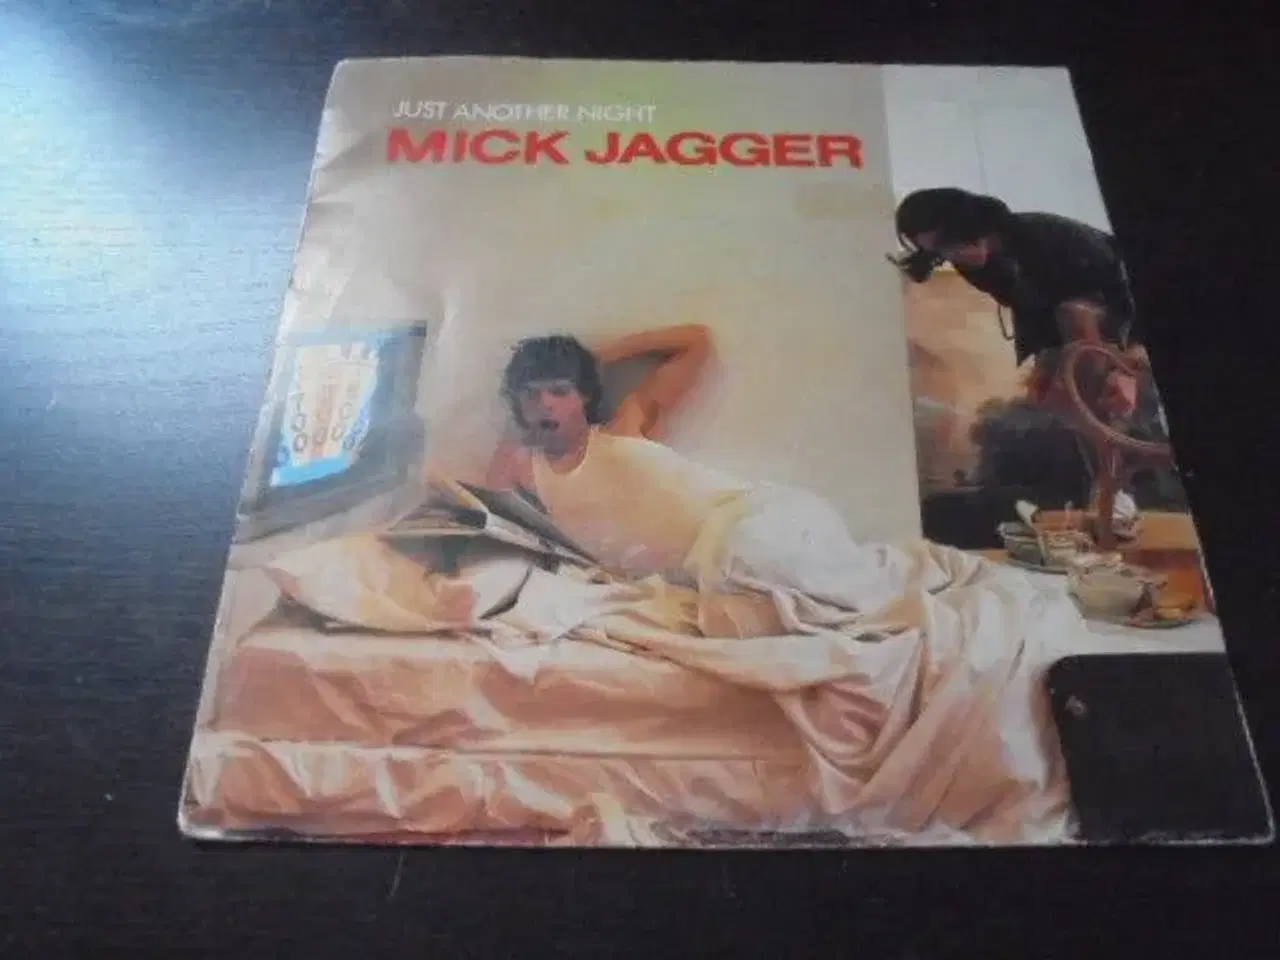 Billede 1 - Single: Mick Jagger - Just another Night 